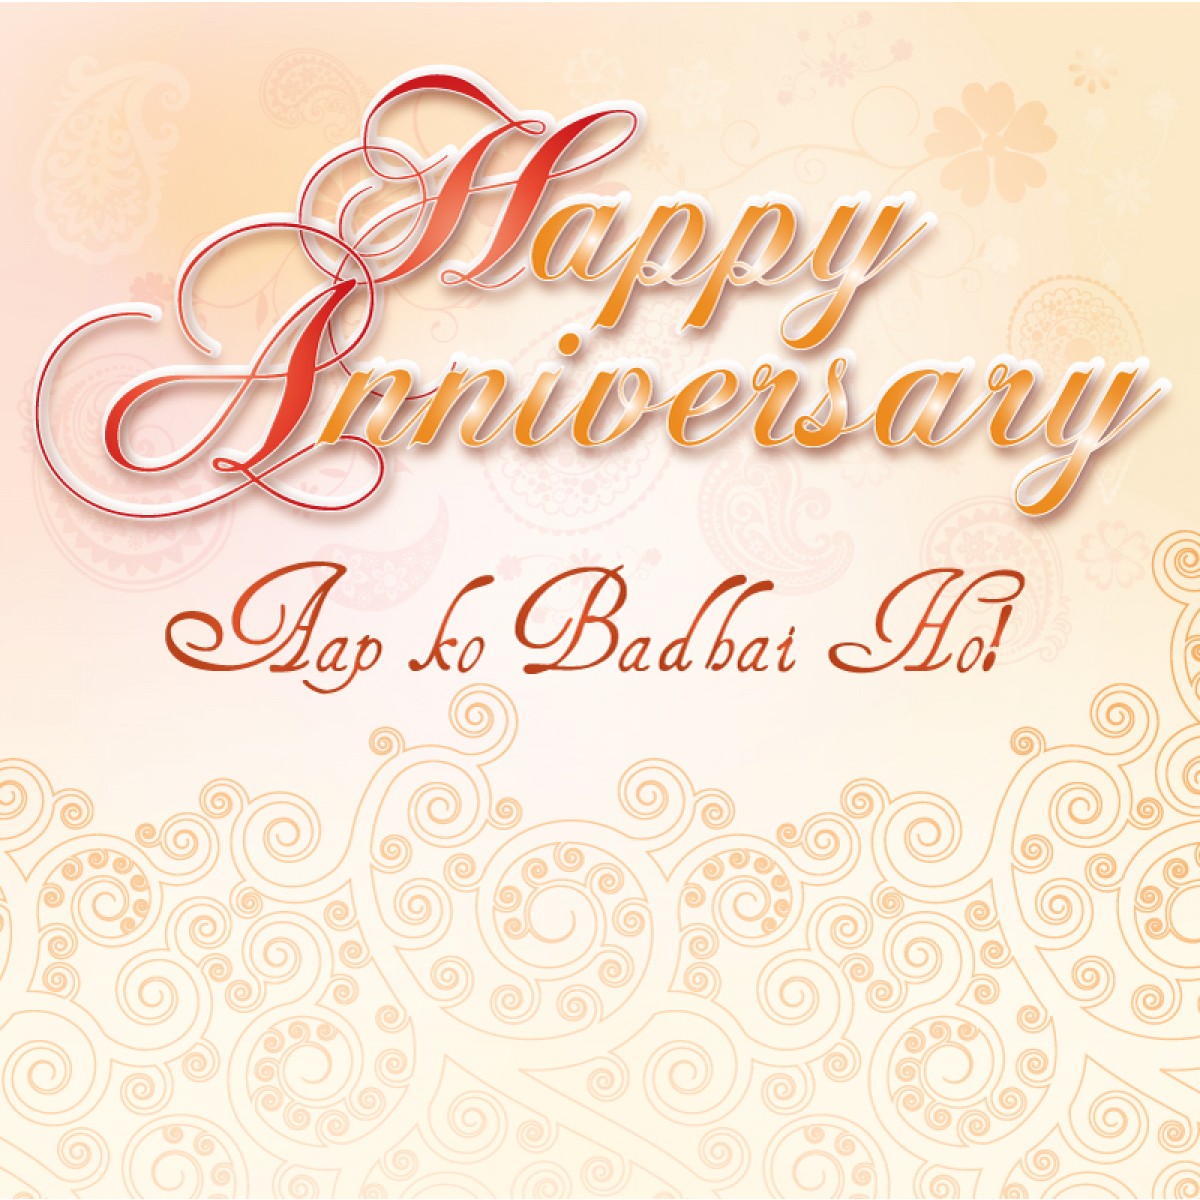 Free Download Fine Hd Wallpapers Download Hd Wallpapers 10x10 For Your Desktop Mobile Tablet Explore 75 Happy Anniversary Background Happy Anniversary Wallpaper Christian Happy Anniversary Wallpaper Images Wedding Anniversary Wallpaper